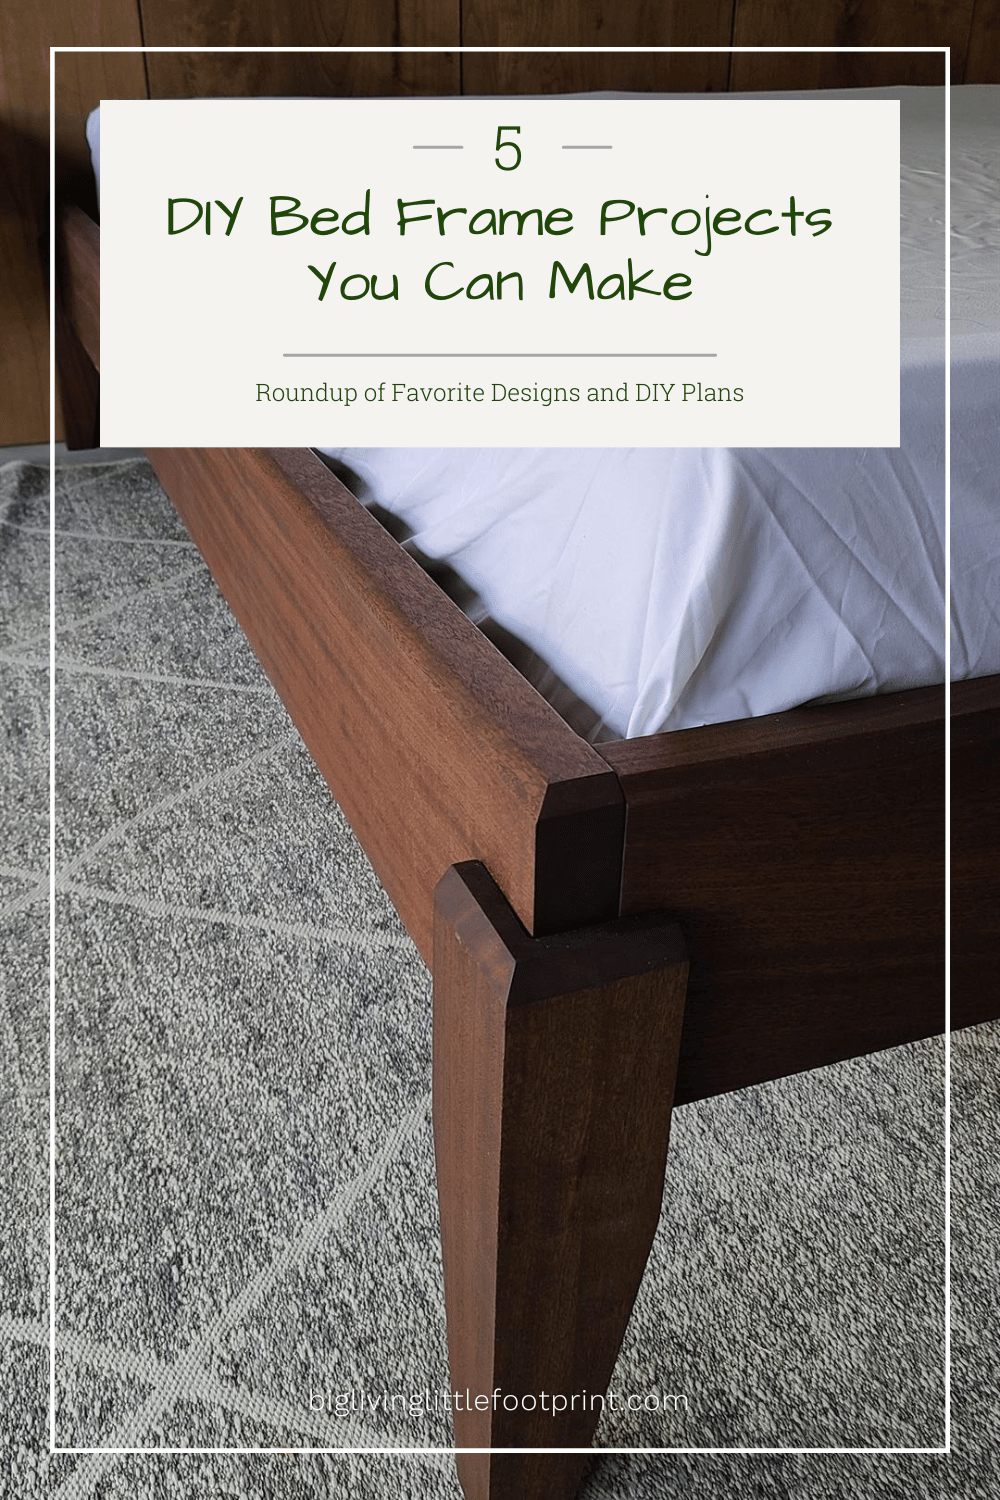 5 DIY bed frame projects you can make - showing the leg of a bed frame